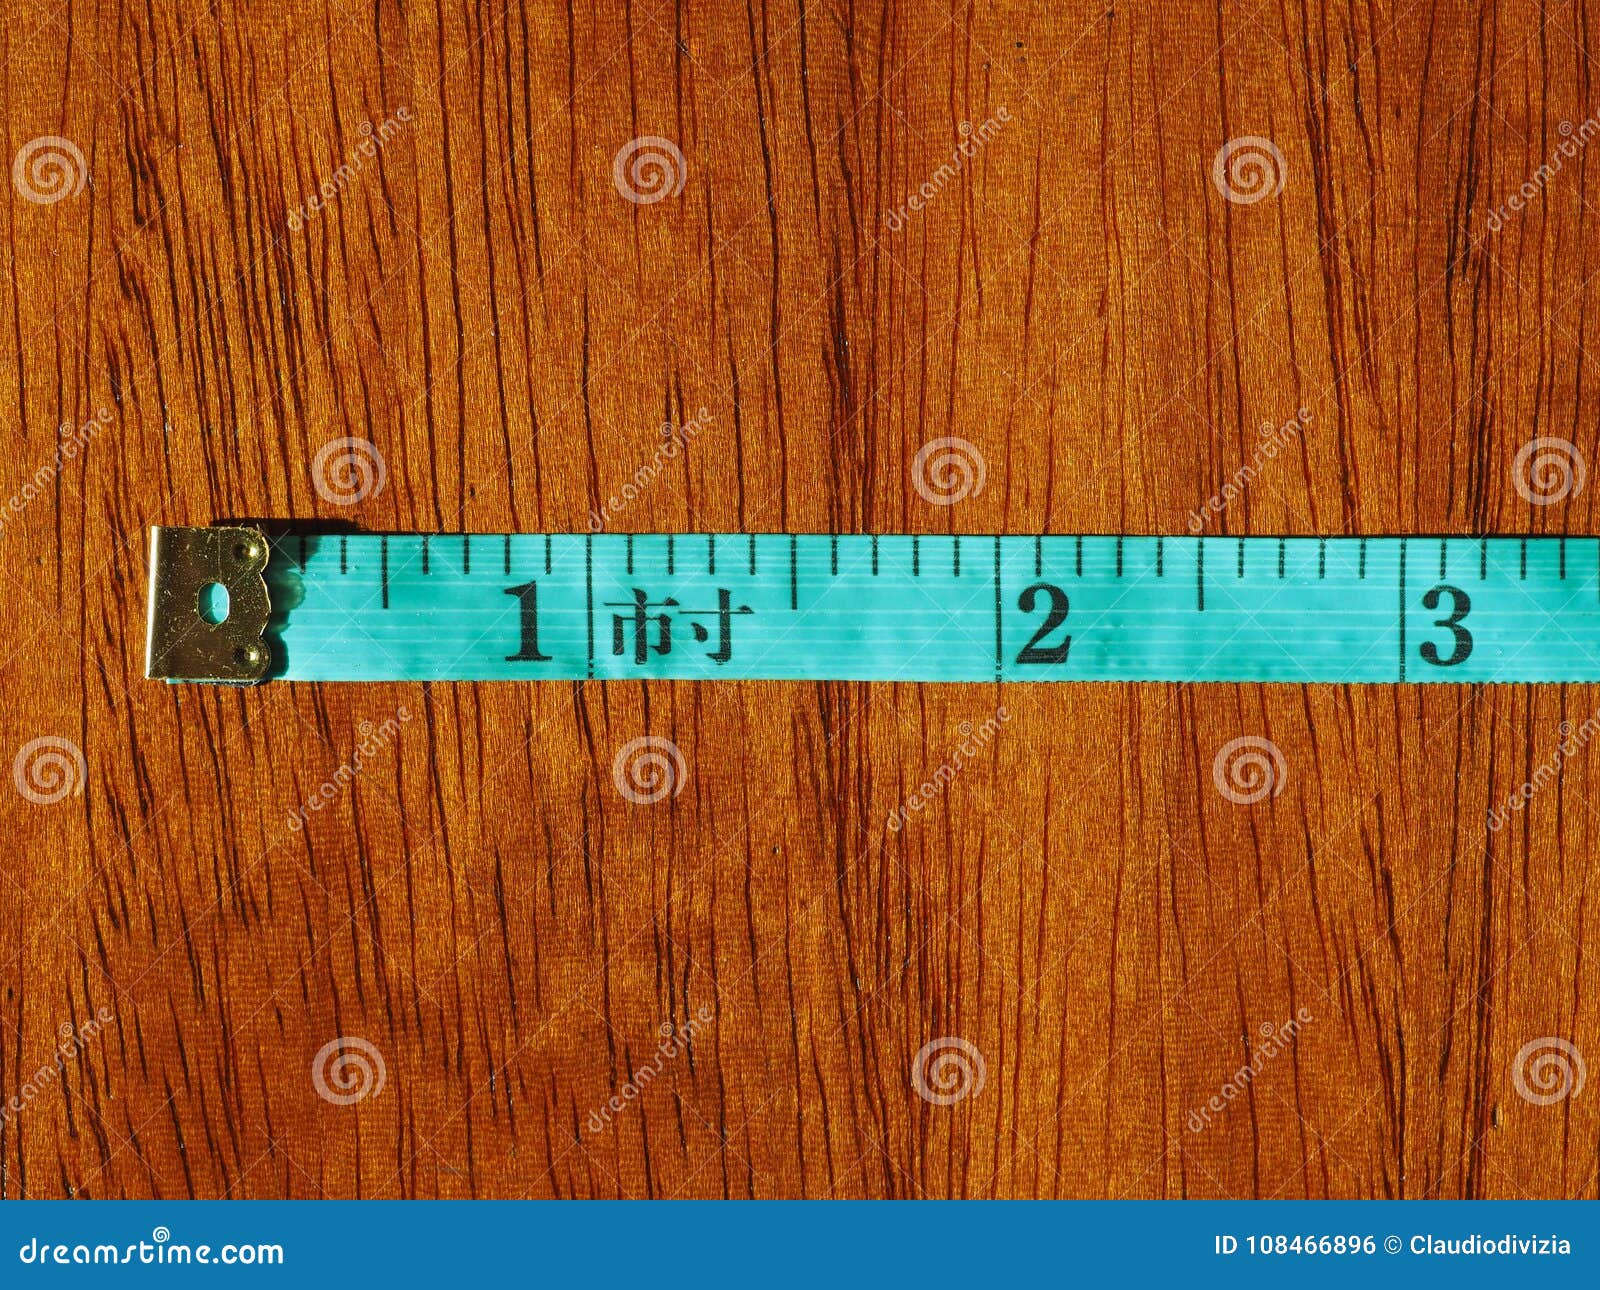 2,200+ Tailor Measuring Tape Stock Illustrations, Royalty-Free